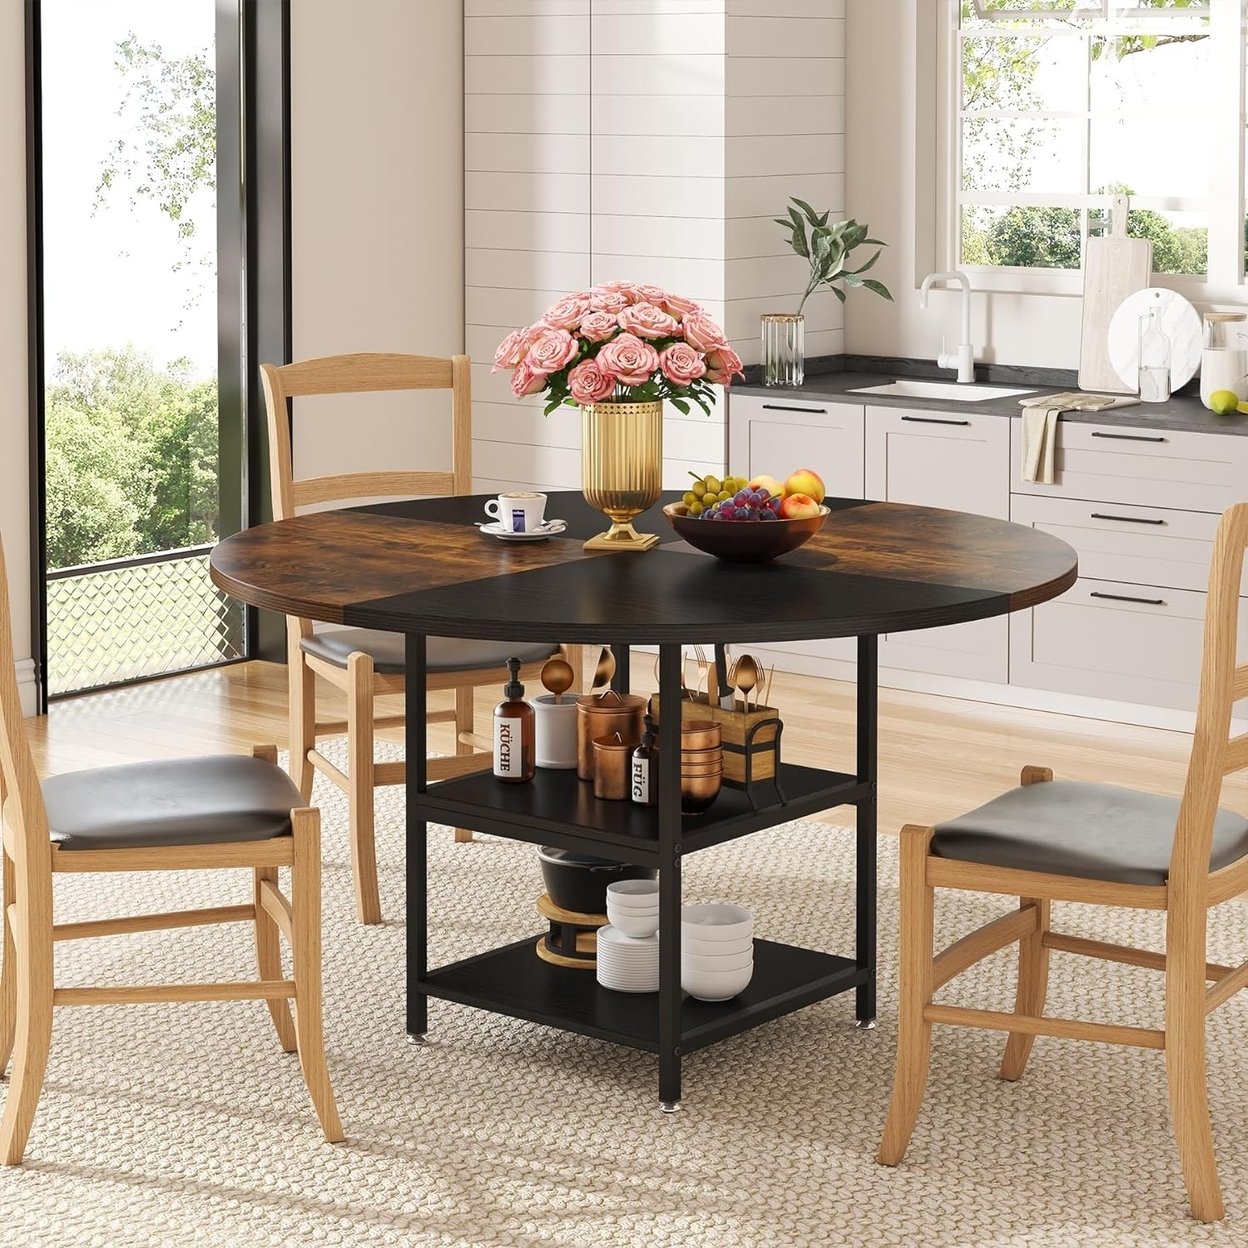 Tribesigns   47 inch Round Dining Table for 4 People Circle Dinner Tables with Storage Shelves